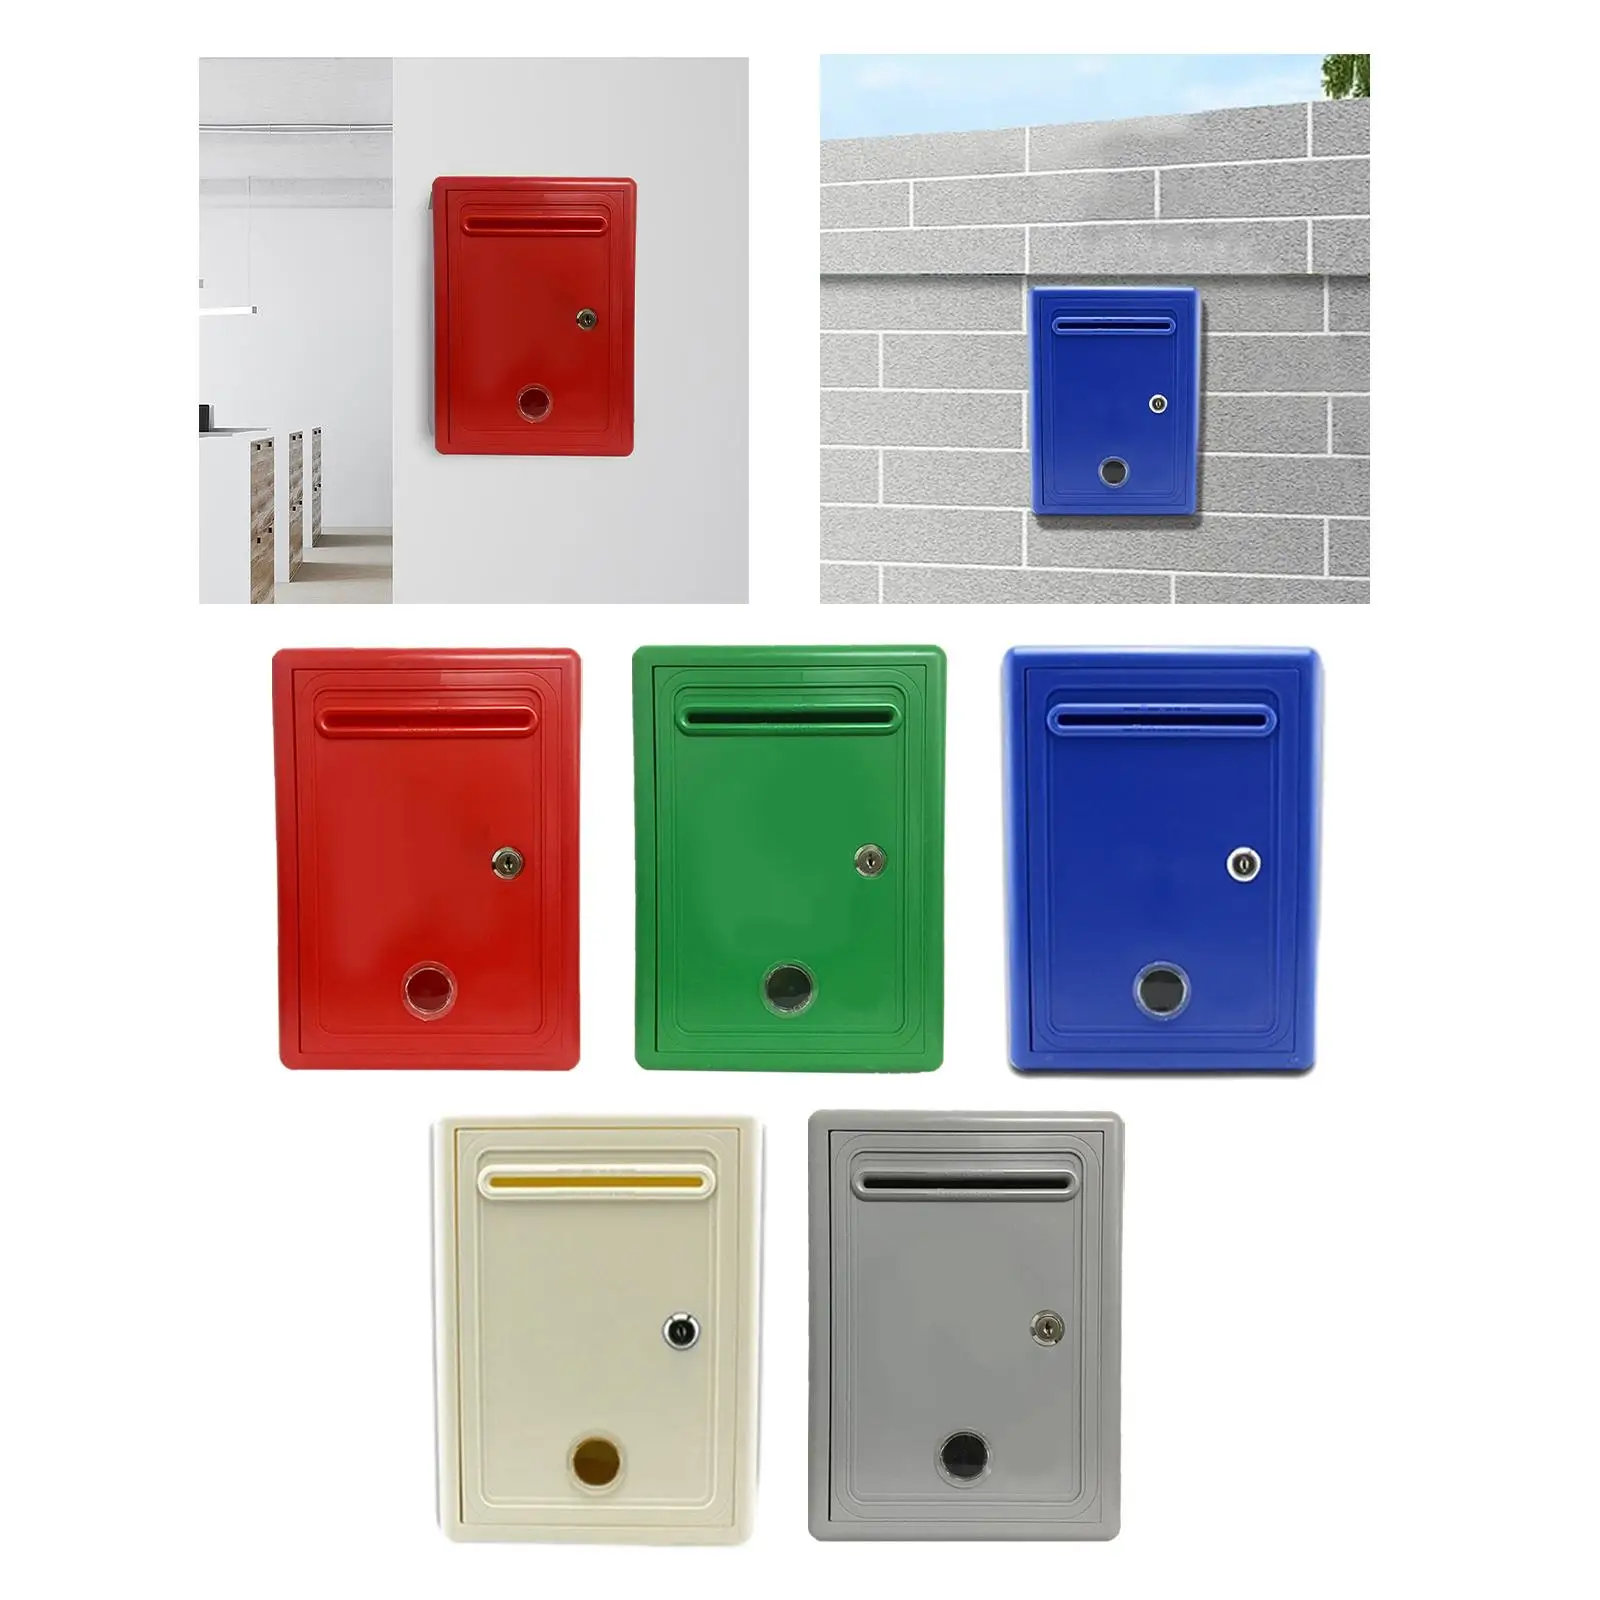 Suggestion Drop Box Letter Box Waterproof Locking with Slot and Lock Complaint